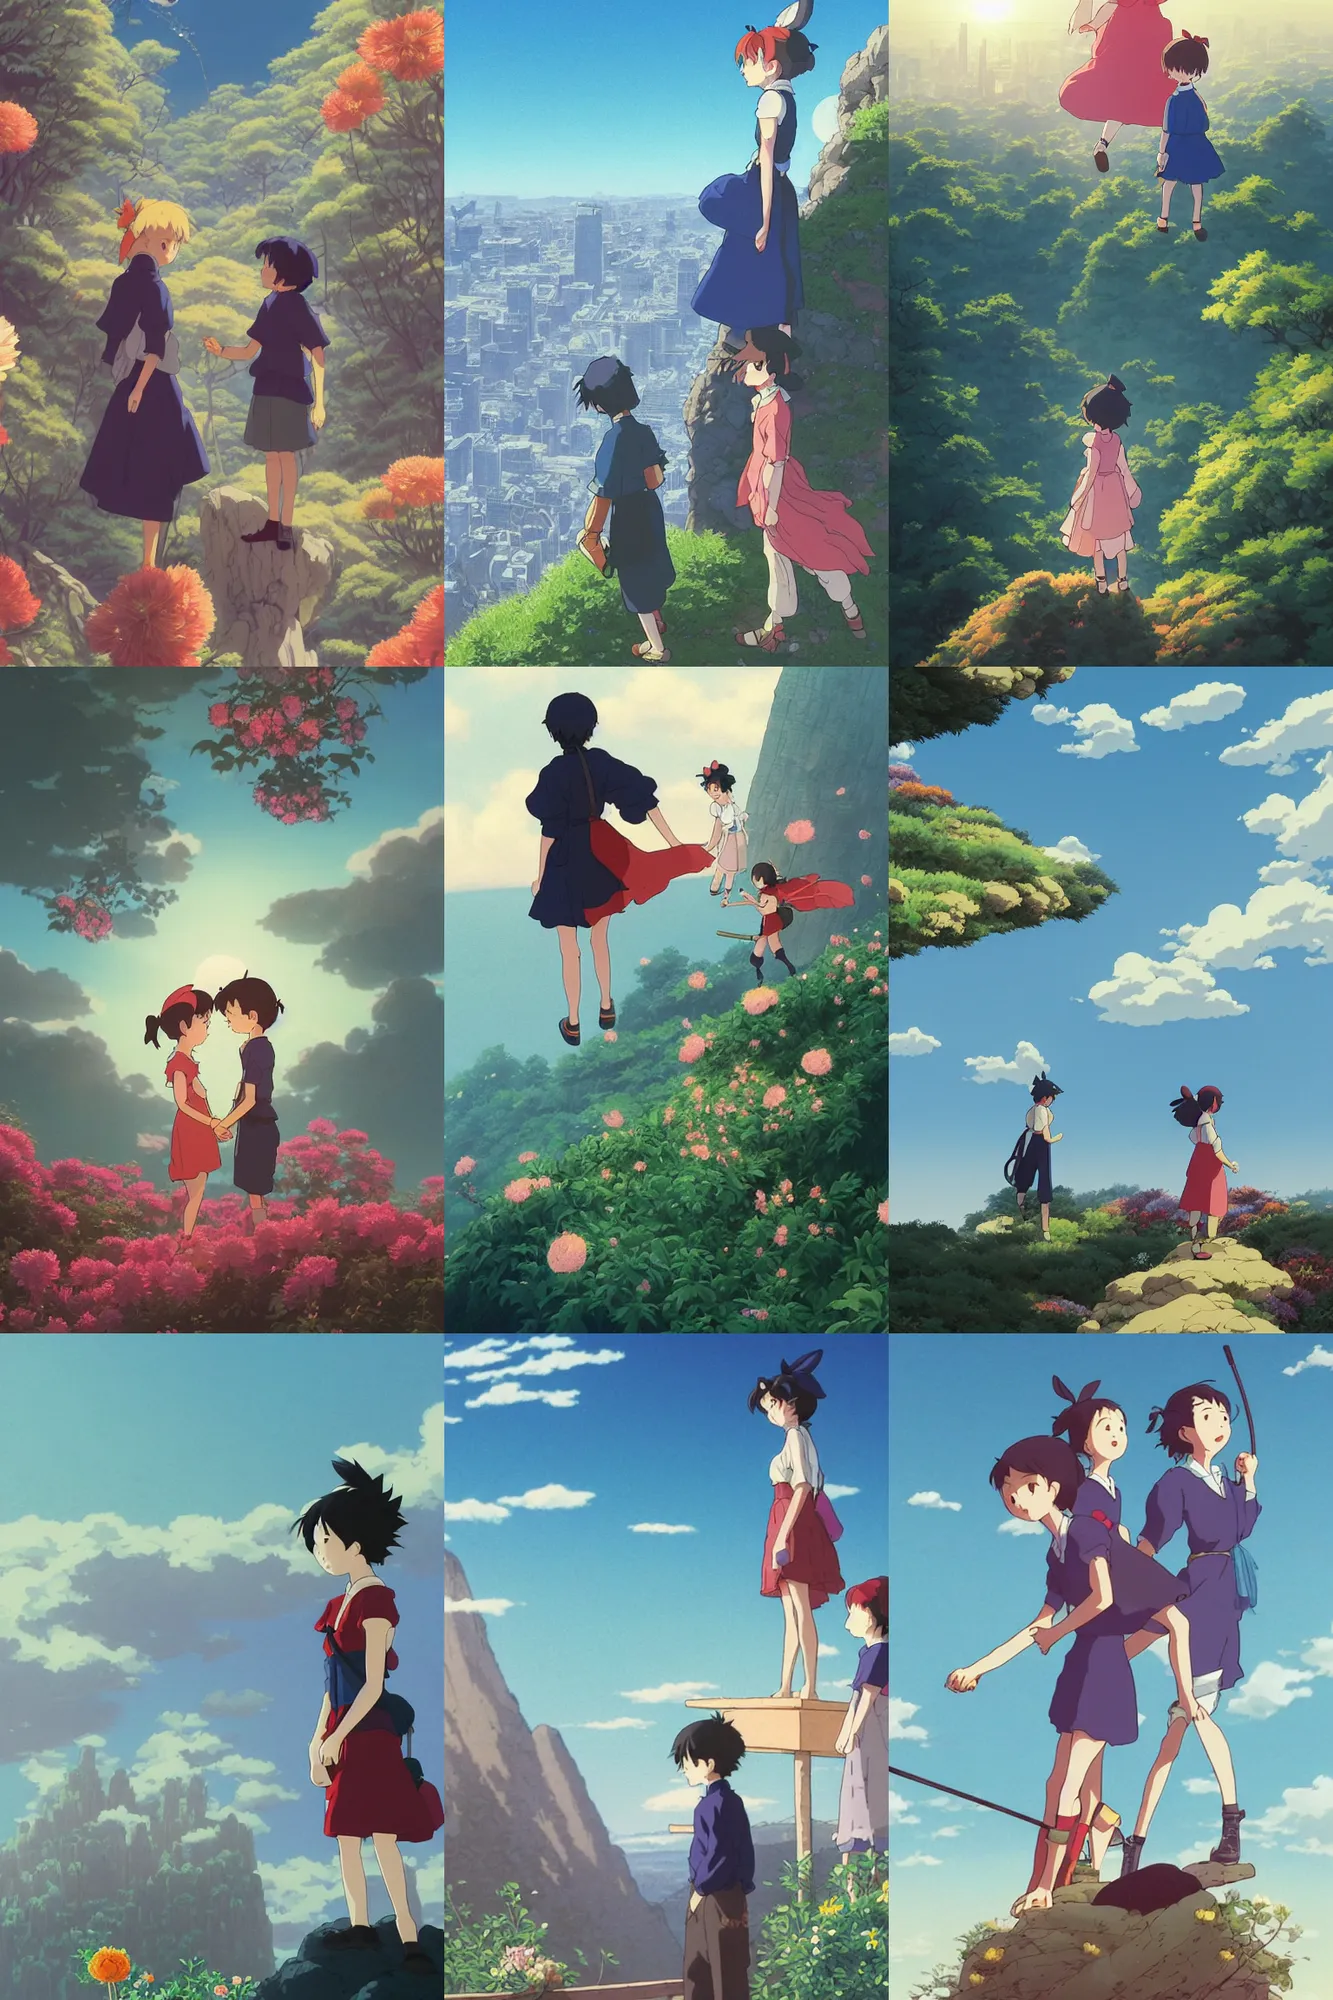 Prompt: atop a skyscraper a cinematic boy girl traditional romance moment of a group of university friends hiking wearing boho clothing and peonies, standing silhouette against the sun, Kikis Delivery Service, Ponyo Hayao Mitazaki, 2008 Studio Ghibli Minimal Movie Posters, fantasy magic, art masterpiece by Greg Rutkowski, Gaston Bussiere, craig mullins, #wip #illustration #illustradraw #illustrator #vector #colors #colorschemes